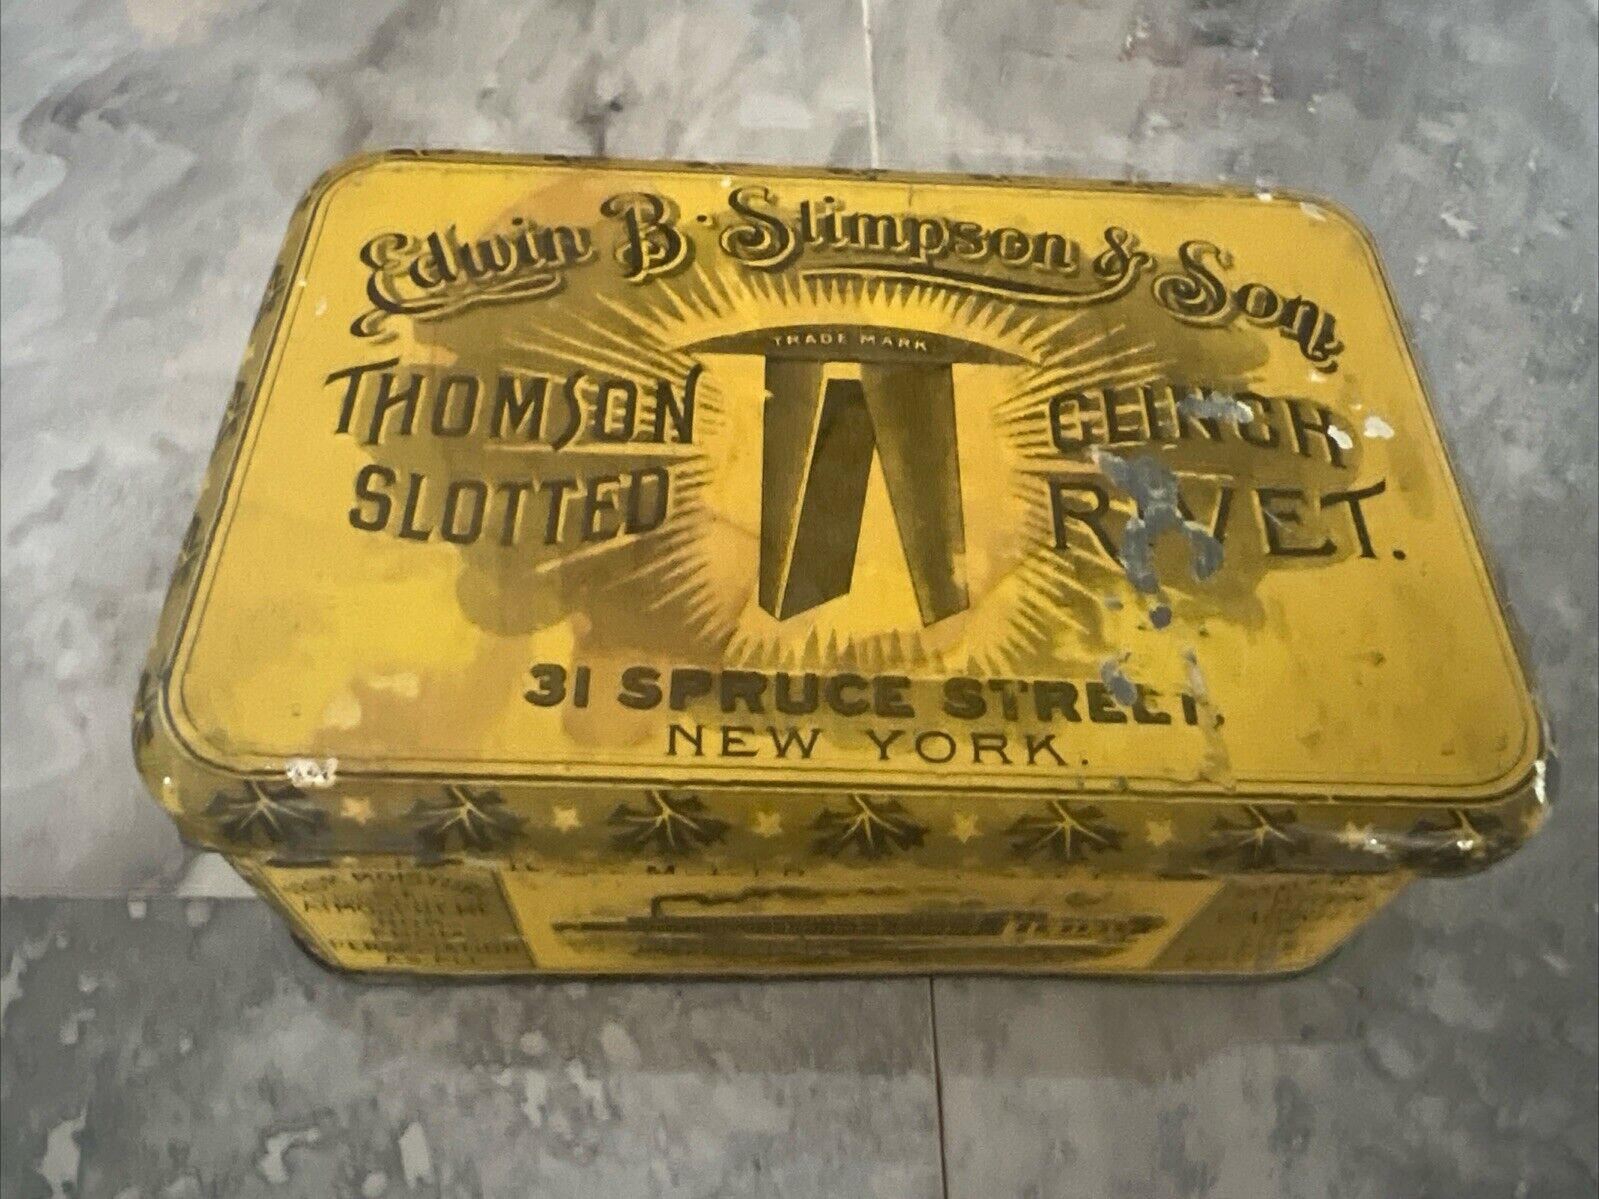 1890s THOMSON SLOTTED CLINCH RIVETS WALTHAM,MASS TIN